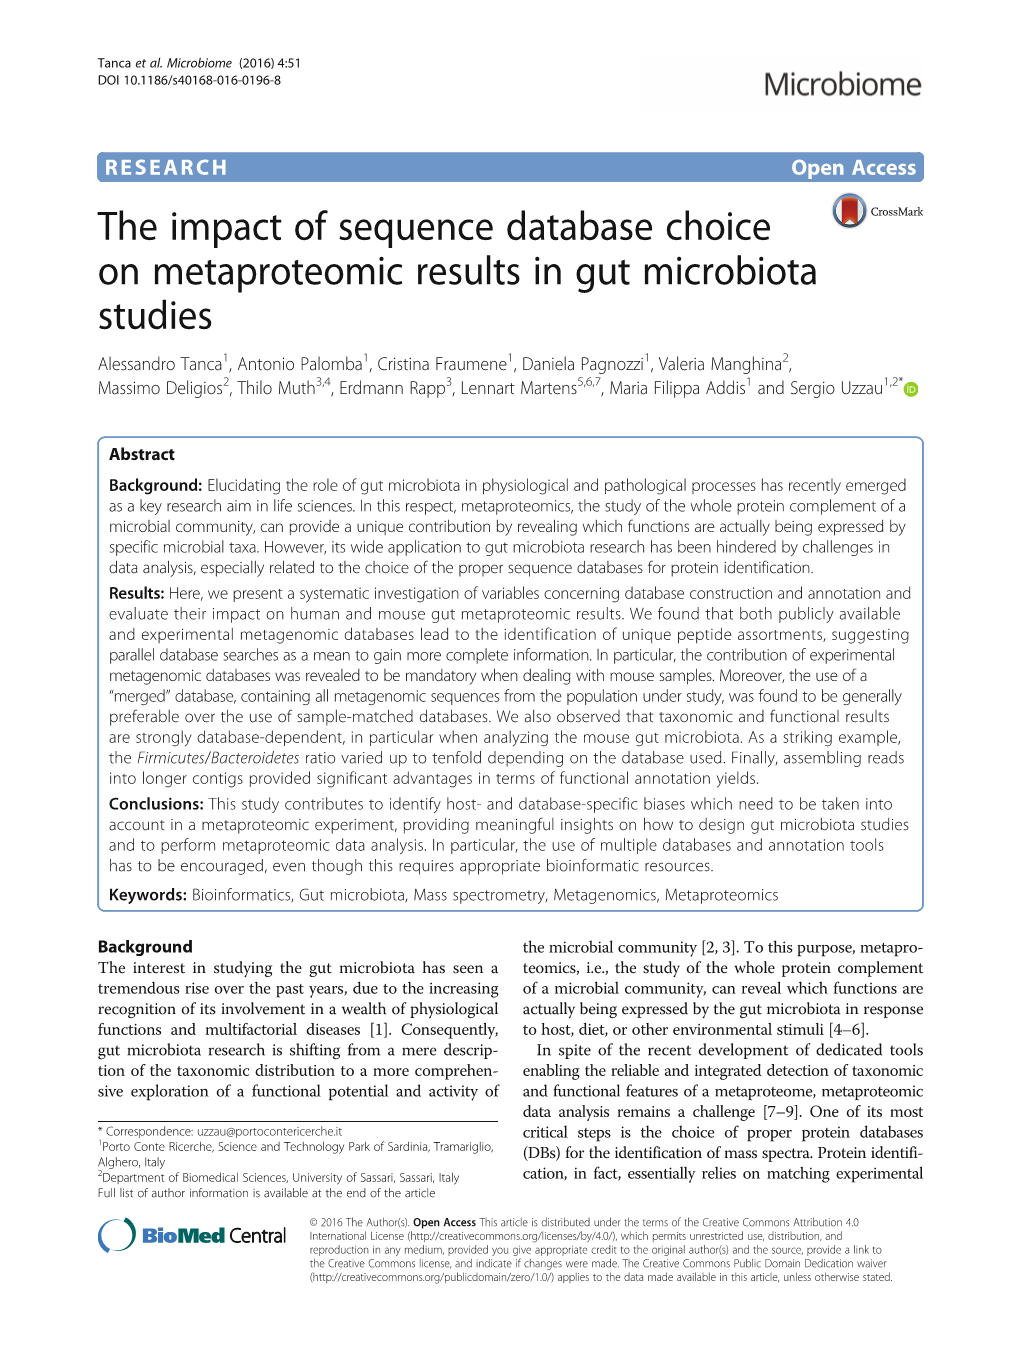 The Impact of Sequence Database Choice on Metaproteomic Results in Gut Microbiota Studies